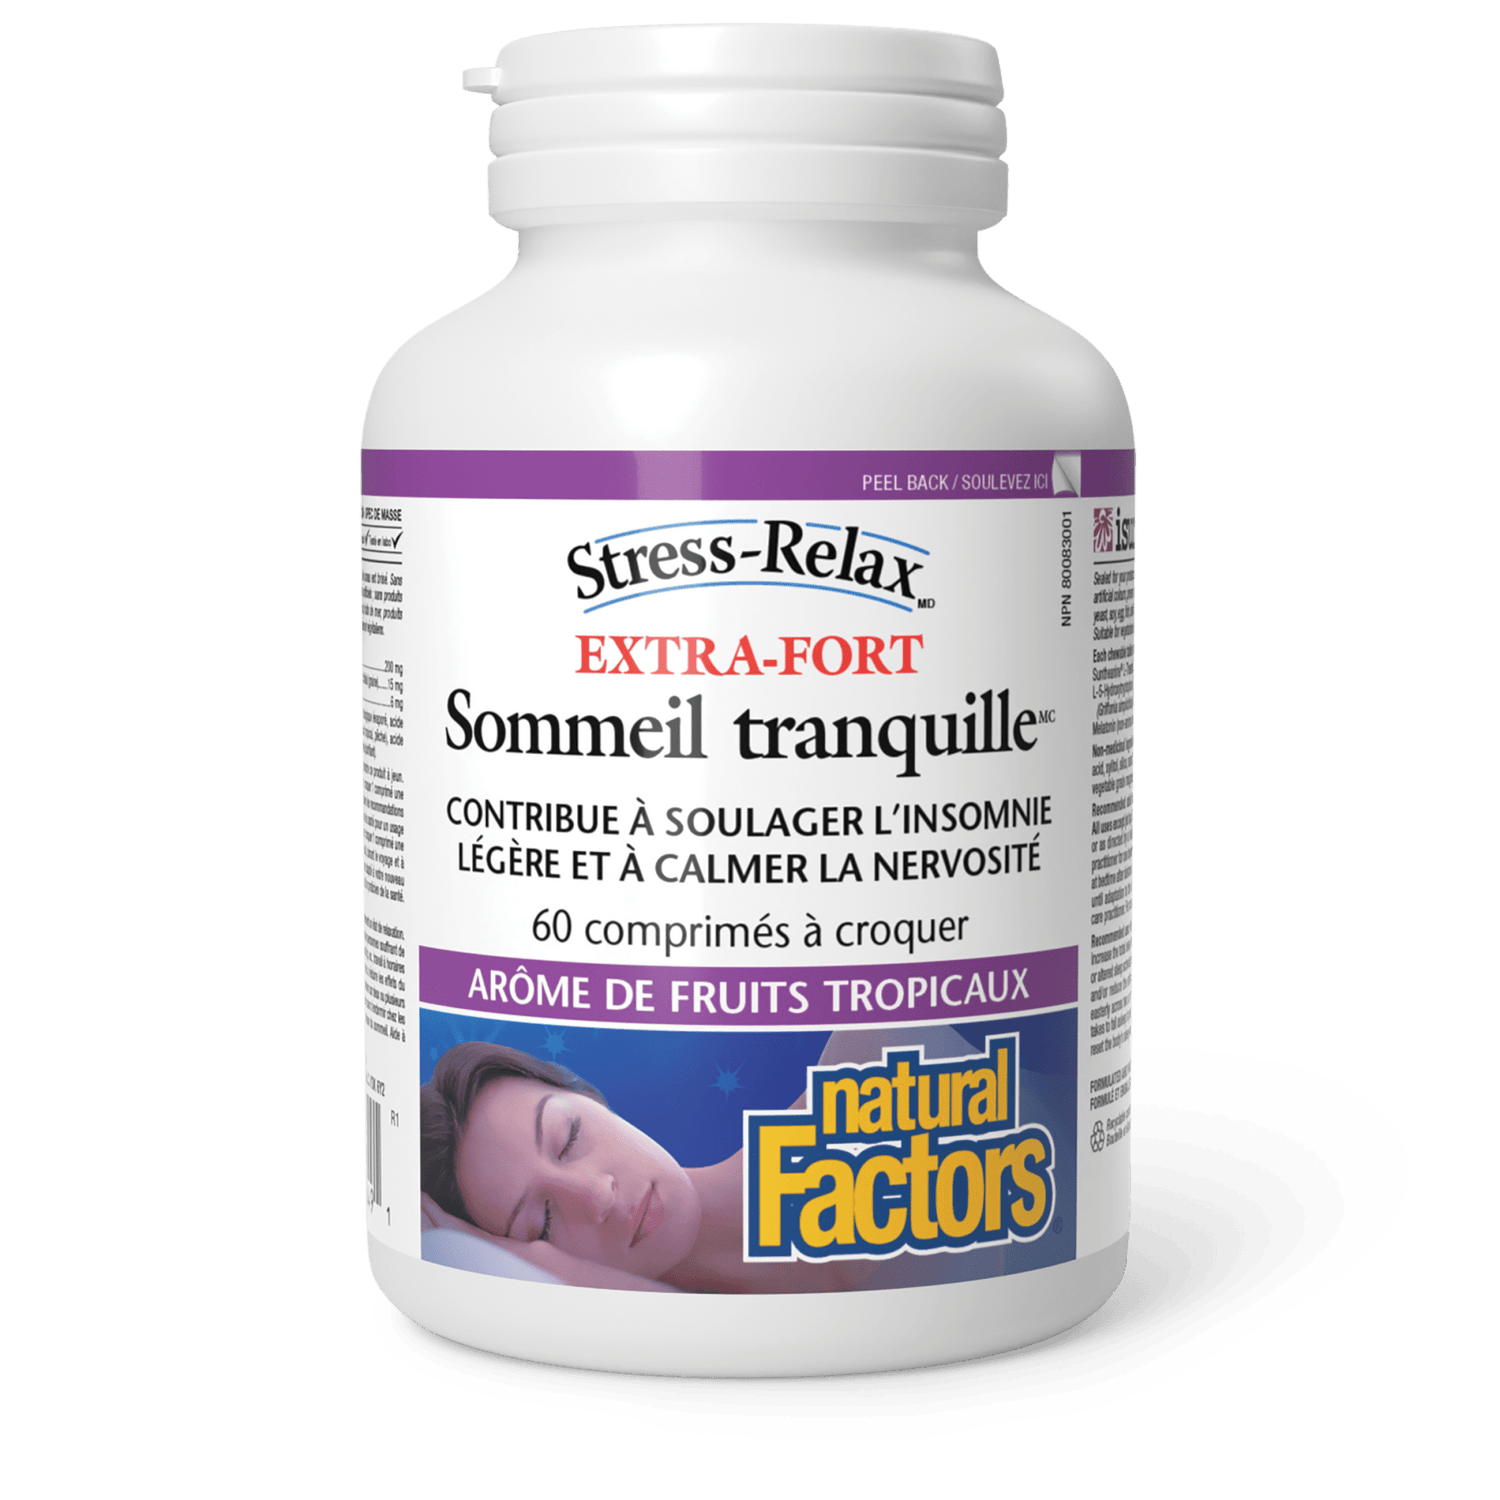 Sommeil tranquille Extra-fort, arôme de fruits tropicaux, Stress-Relax, Natural Factors|v|image|2849